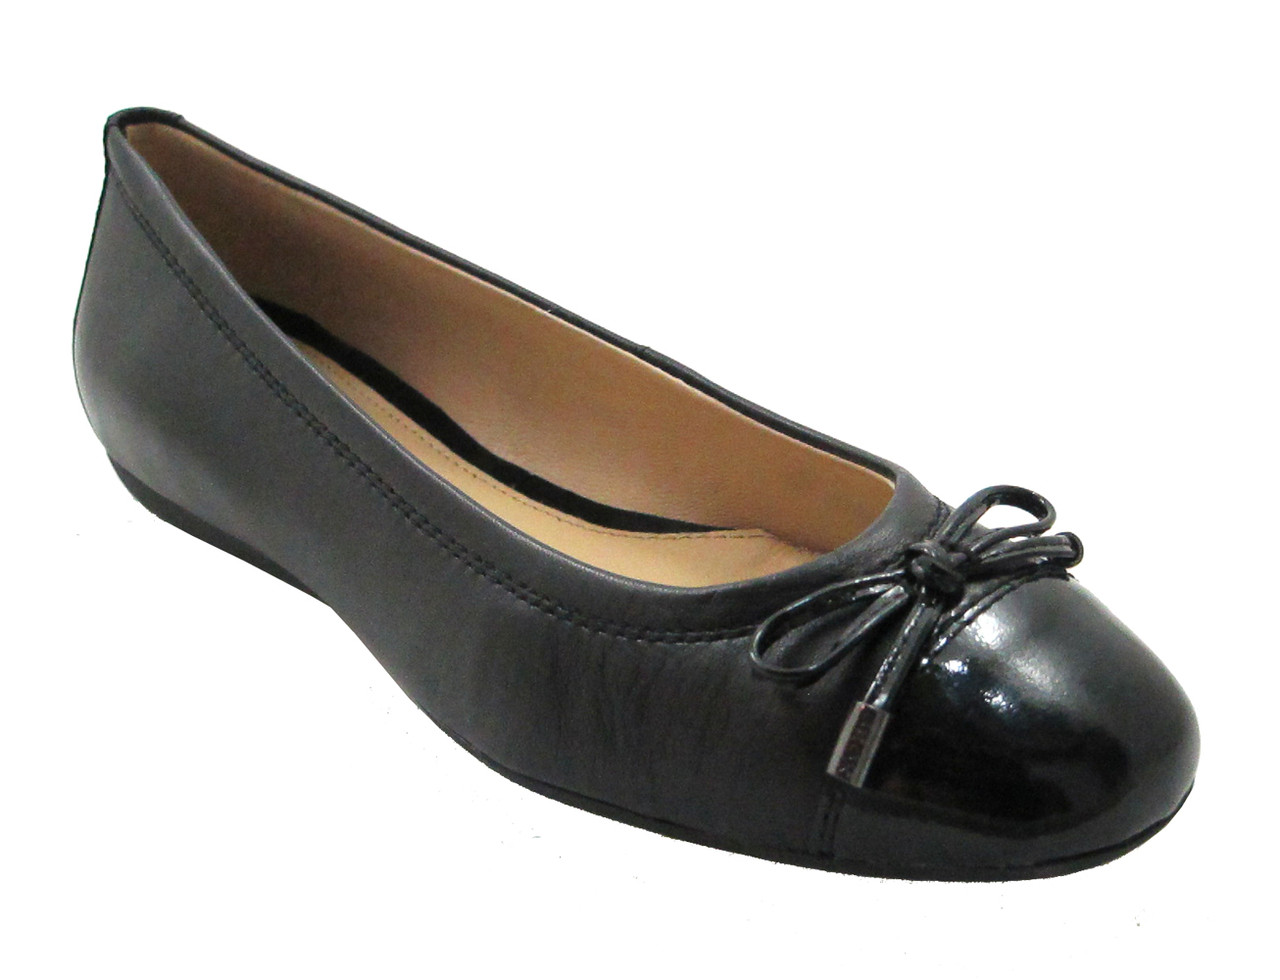 Geox Respira Dlola L - Nappa Patent Leather Flat Ballet shoes Grey or Black